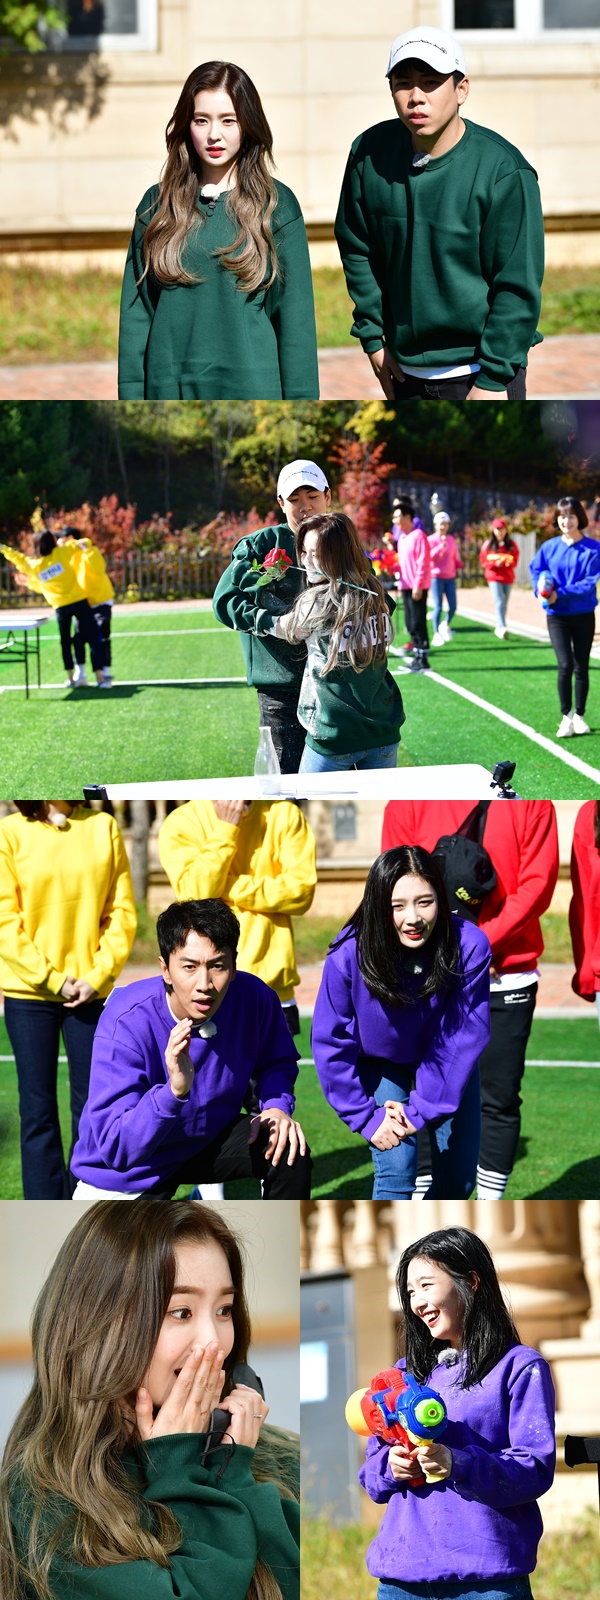 Red Velvet Irene and comedian Yang Se-chan will show off unexpected Couple Chemie at Running Man.On SBS Running Man, which is broadcasted today (25th), Boiler Couple Red Velvet Irene and comedian Yang Se-chan will play.Yang Se-chan, who has been attracting attention with Irene and shocking synthetic photos in the last broadcast, said, (Oh! Oh! Ill put you in a warm place!(Lin) Lin ** Lee! I was cheered by everyone by Irenes choice.As Irene and Yang Se-chan are expected to play a couple, Red Velvet Irene and Joey have captured the members with their drama and drama charm.Irene laughed at the members by calling them pretty Ji Suk-jin with the charm of walking my way without understanding the rules late or bowing to the surrounding situation.Joey, on the other hand, became a Chain Reaction rich man who immediately reacted with a big smile even after the members words, and the members added, Joey is like a balloon at the venue because Chain Reaction is so big.On the other hand, todays broadcast is decorated with Knowing Pair Race, and Actor Kangna and Seol In-ah appear with Red Velvets Irene - Joey to perform a full-scale couple race after last week.